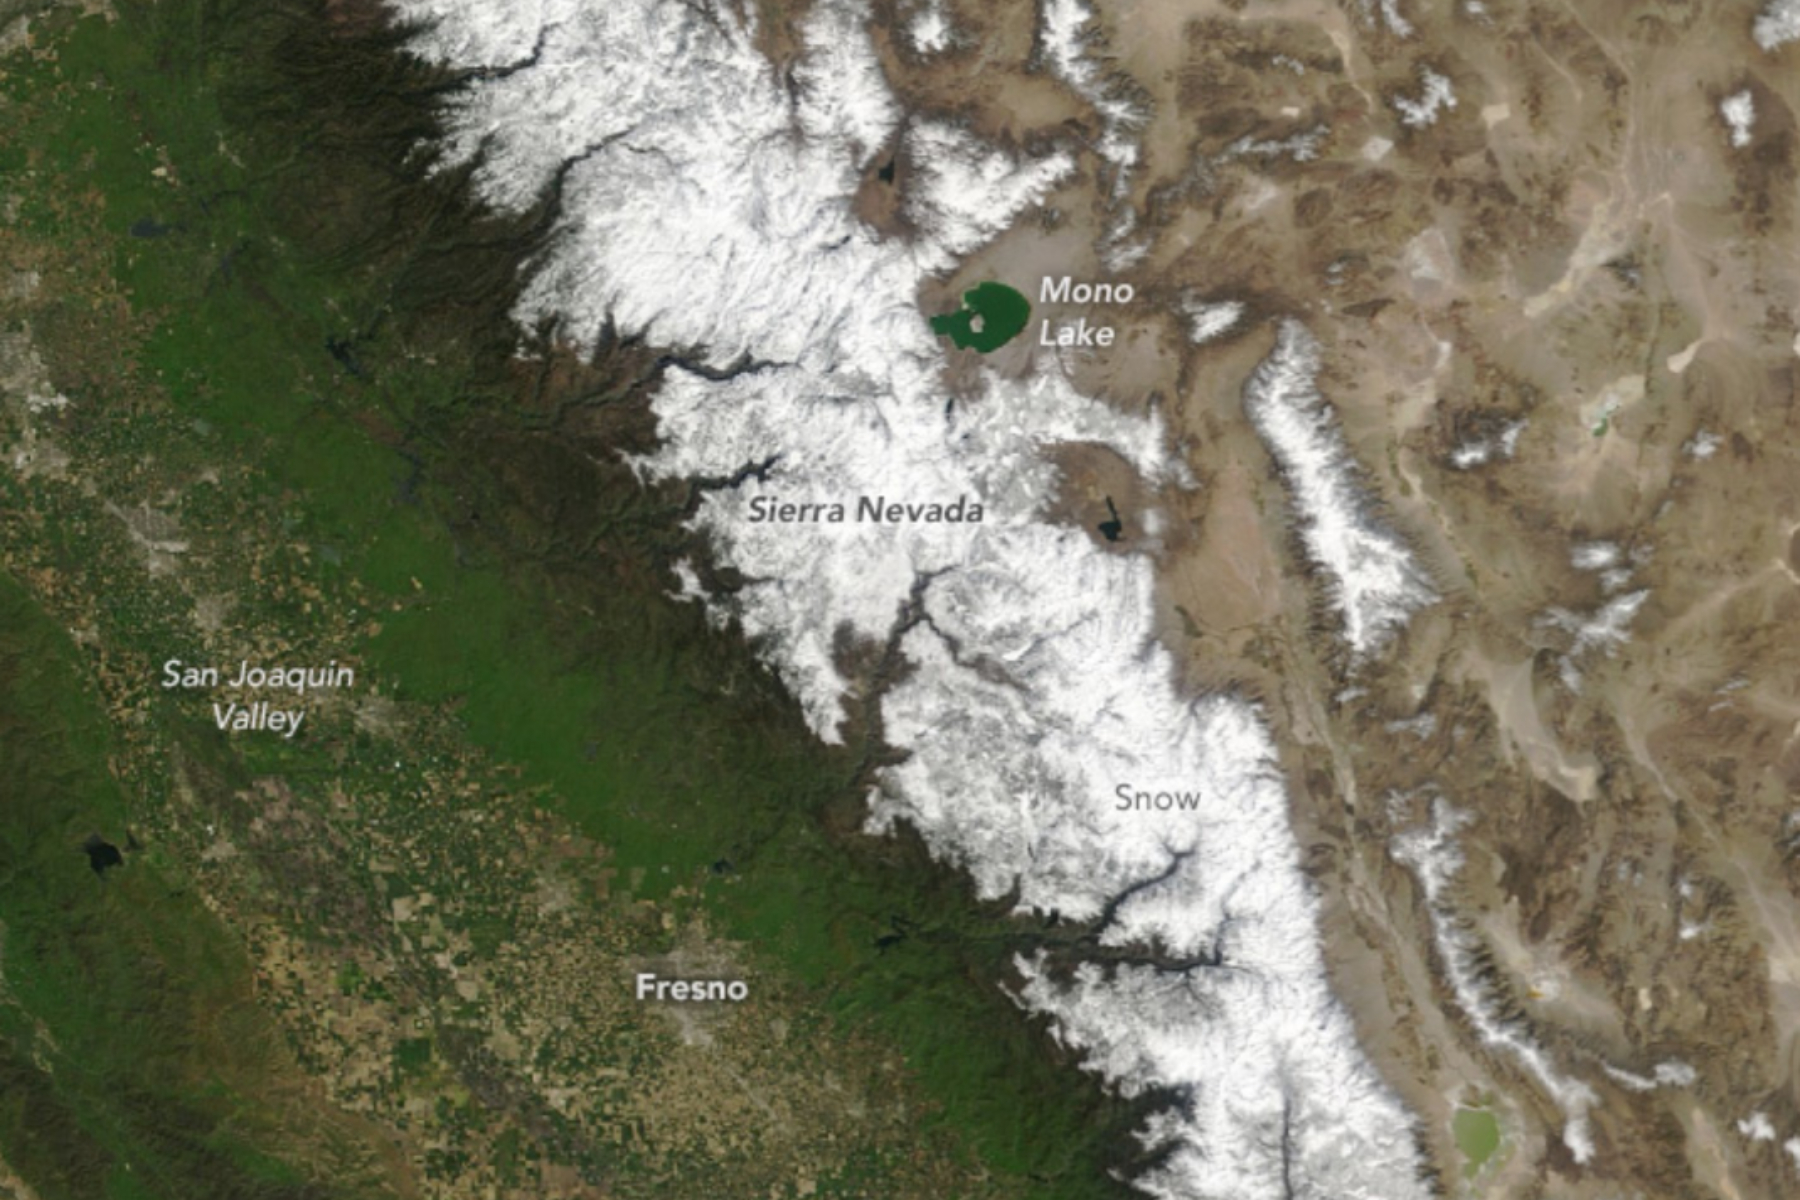 California snowpack’s “atypical” year revealed in NASA image